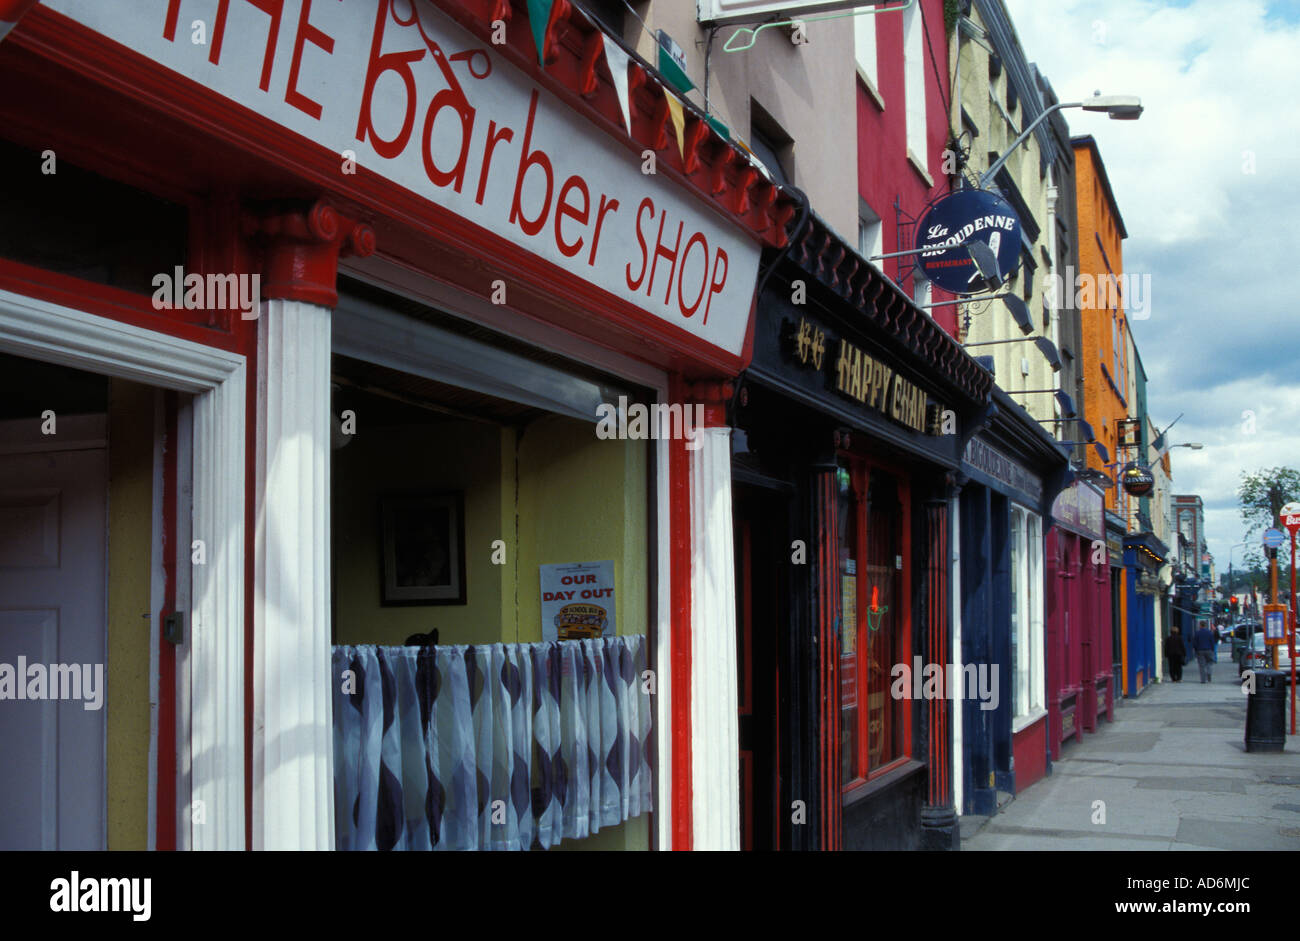 Barber shop in the town of Fermoy County Cork Ireland May 2005 Stock Photo